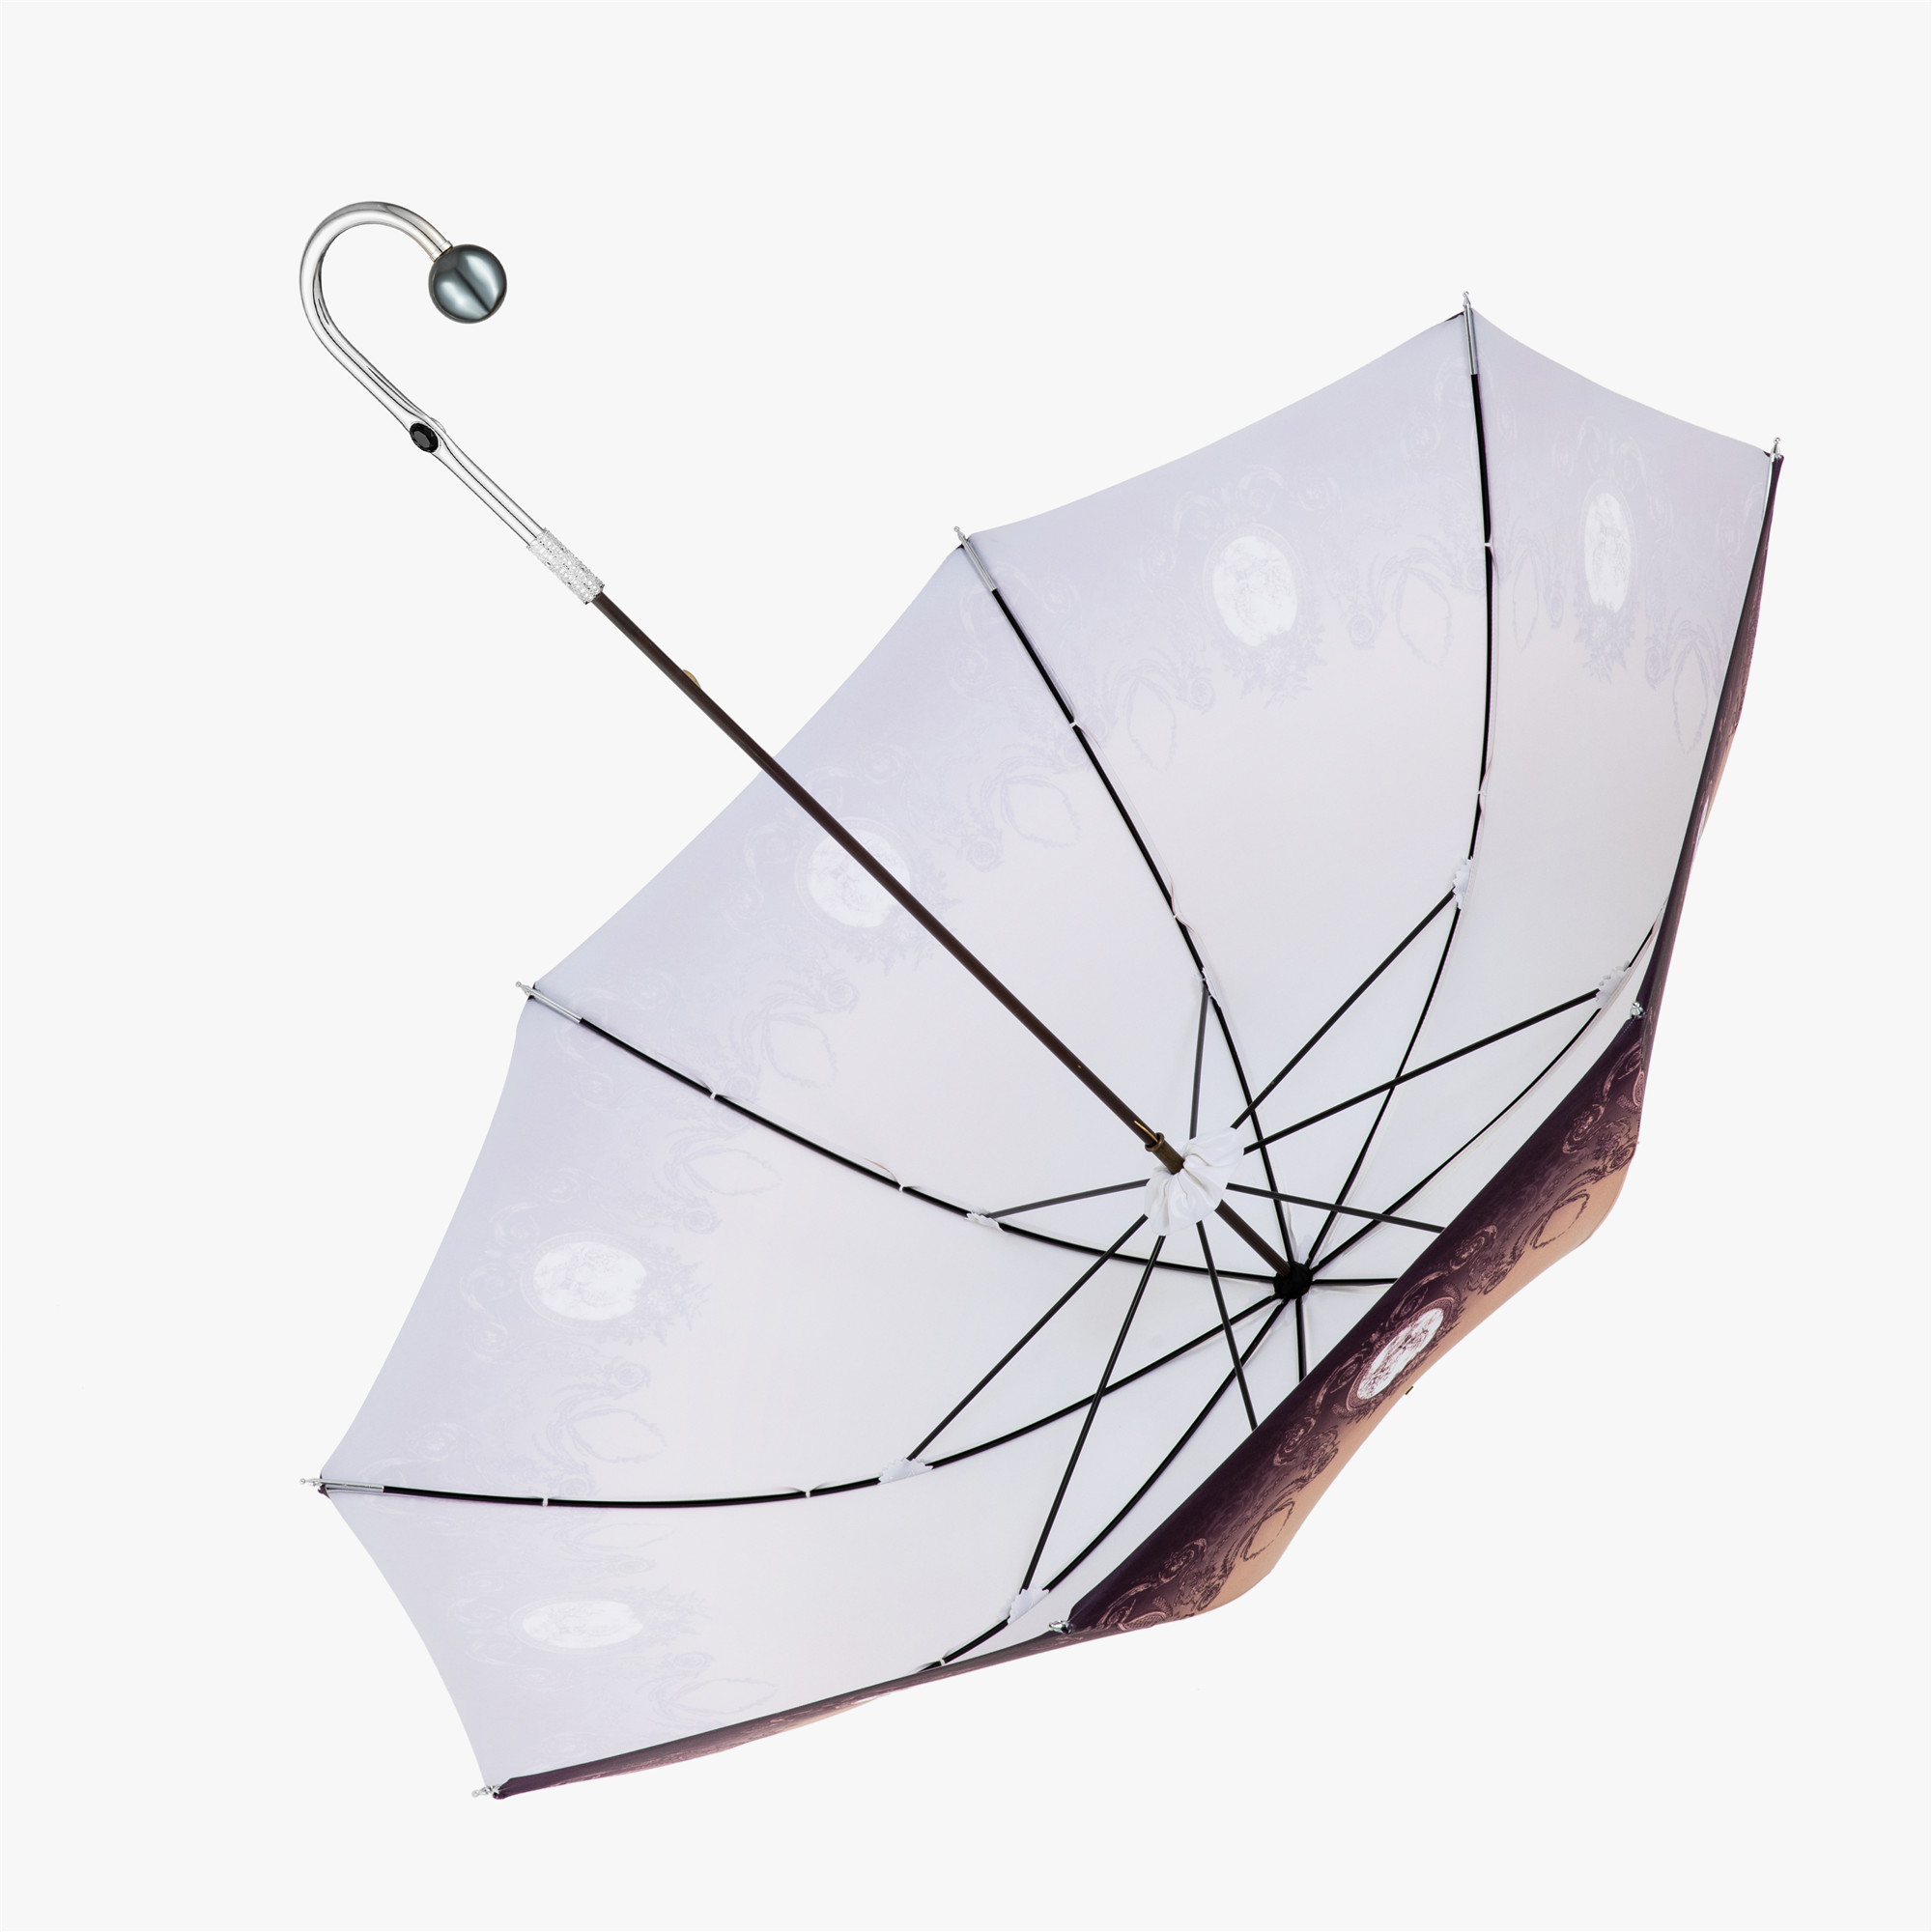 Black pearl umbrella with curved handle